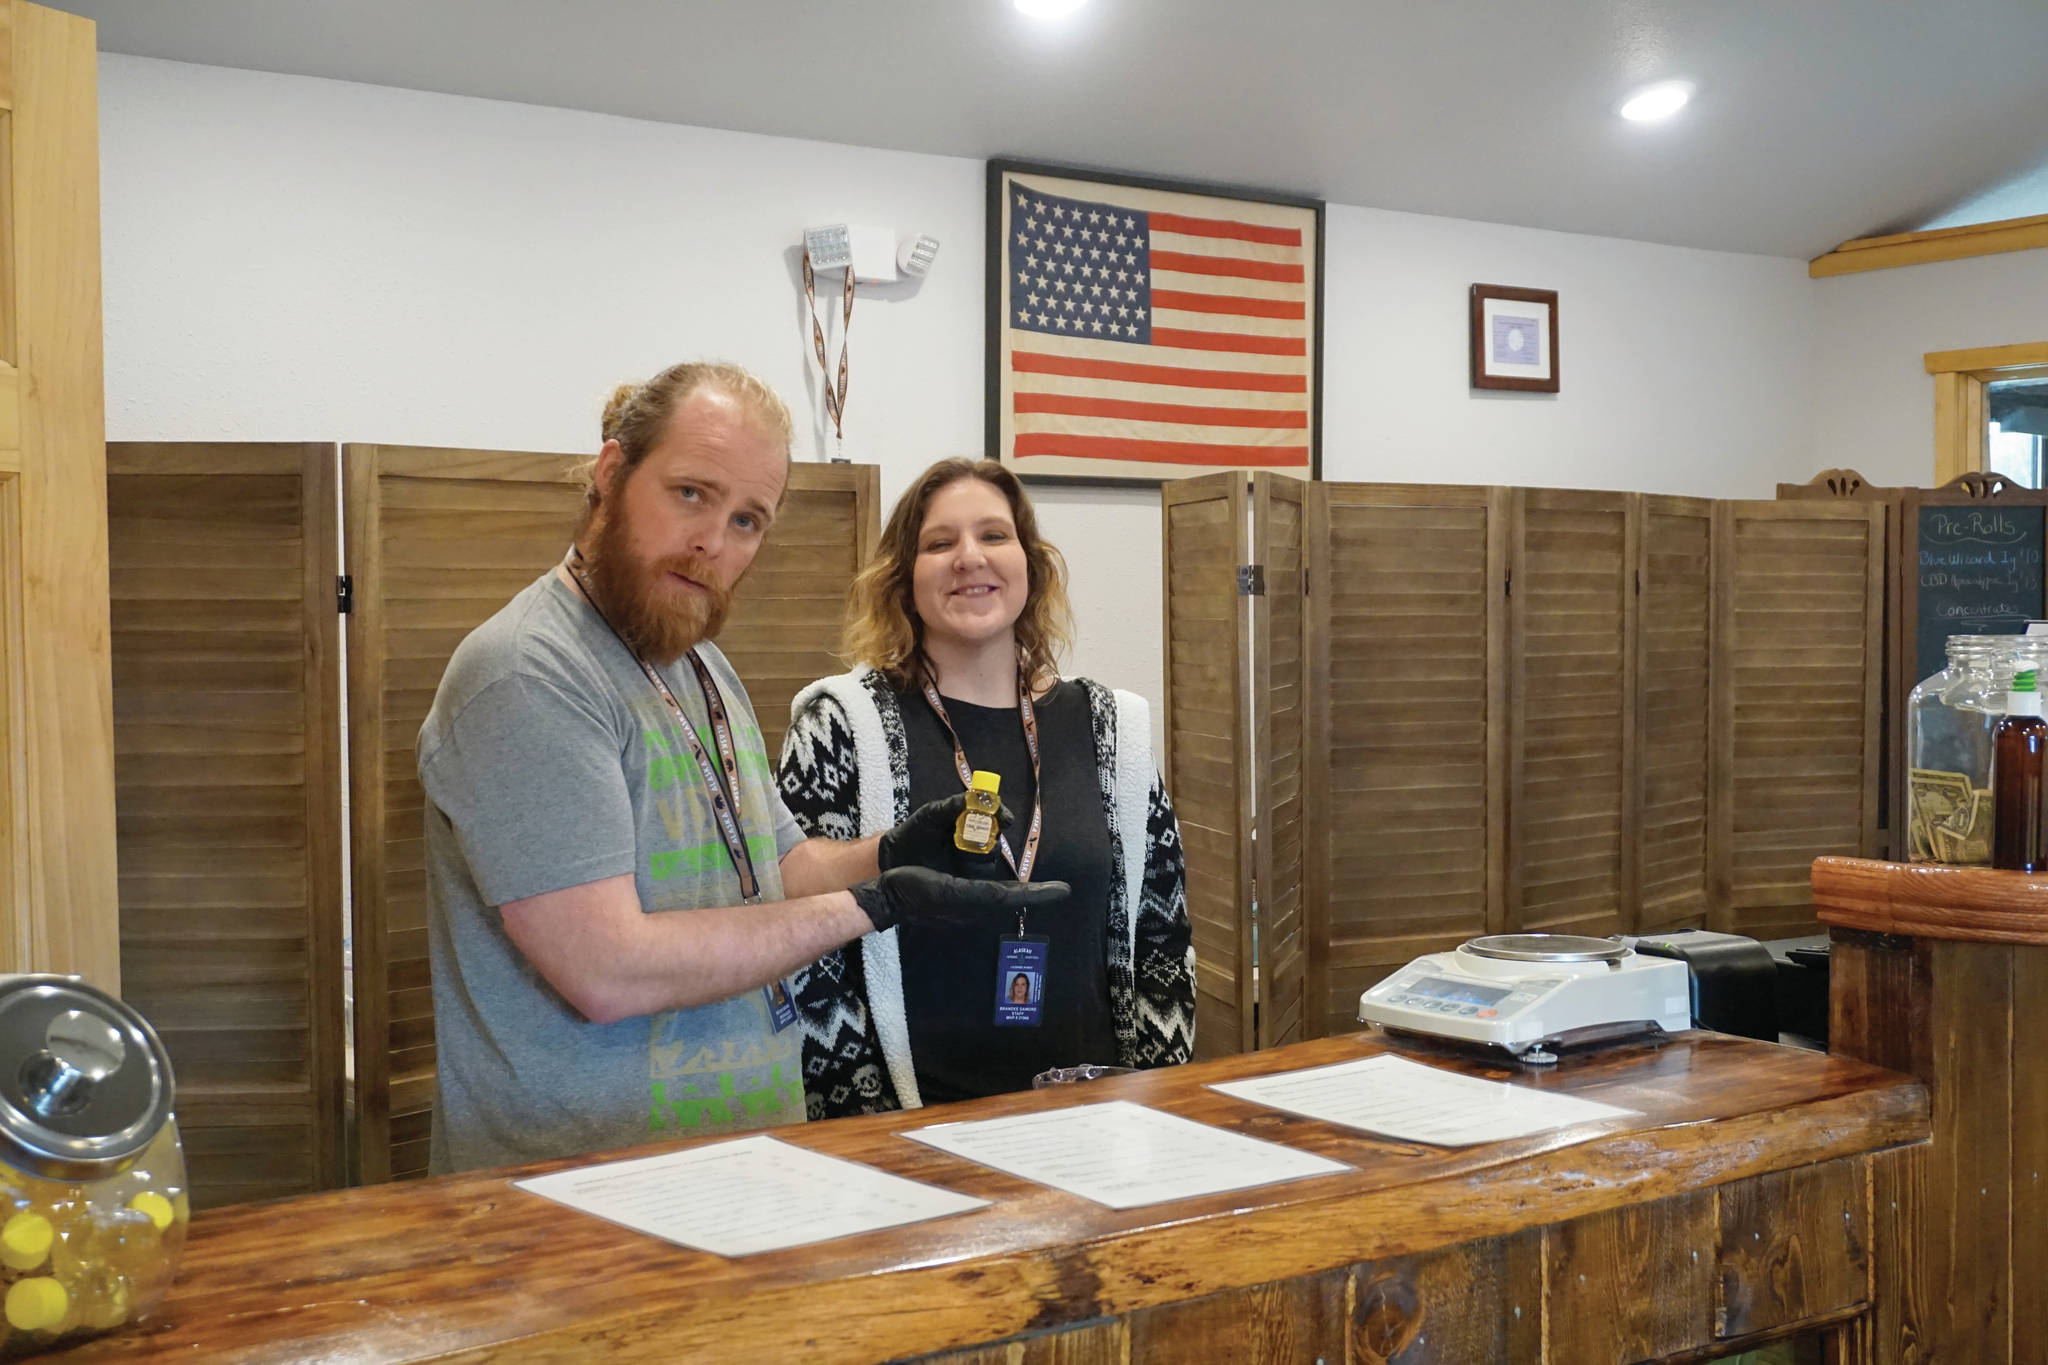 Micah Bear displays a bottle of CBD honey while manager Brandee Damore watches at the opening day of Alaskan Cannabis Outfitters, a new cannabis retail store. It’s is located right at Mile 168 Sterling Highway just before the road turns toward Baycrest Hill. The store opened on 4/20 — April 20, 2020 — in Homer, Alaska. Micah Bear’s brother, Ian Bear, is the licensed owner of the store founded by their father, Bill Bear, who died in December 2019. (Photo by Michael Armstrong/Homer News)                                Micah Bear displays a bottle of CBD honey while manager Brandee Damore watches at the opening day of Alaskan Cannabis Outfitters, a new cannabis retail store. It’s is located right at Mile 168 Sterling Highway just before the road turns toward Baycrest Hill. The store opened on 4/20 — April 20, 2020 — in Homer, Alaska. Micah Bear’s brother, Ian Bear, is the licensed owner of the store founded by their father, Bill Bear, who died in December 2019. (Photo by Michael Armstrong/Homer News)